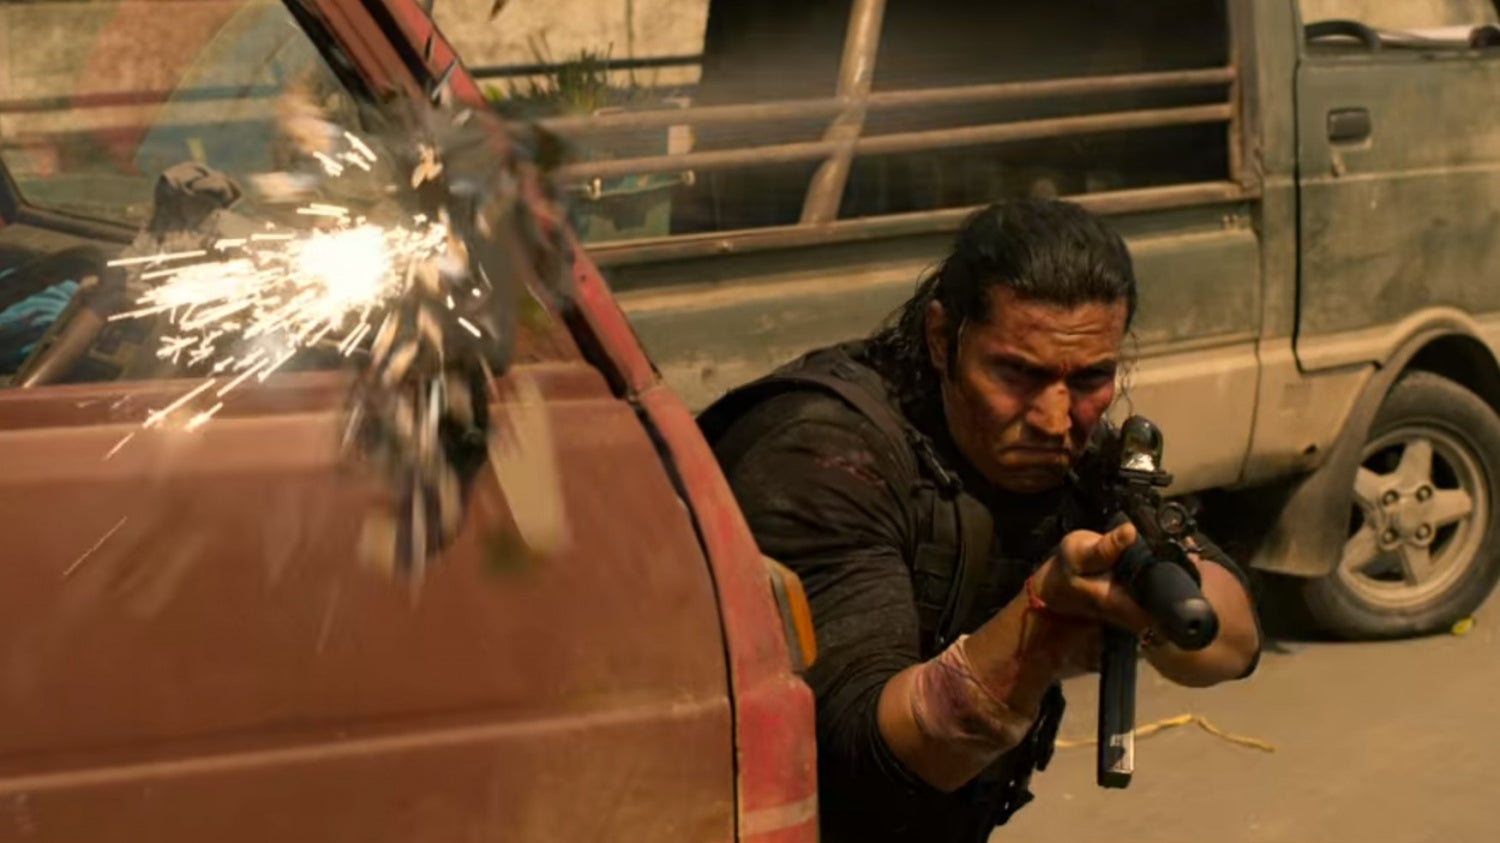 In the final shootout scene, one of the main characters is constantly transitioning his MP5 from shoulder to shoulder, adapting to the cover he is using